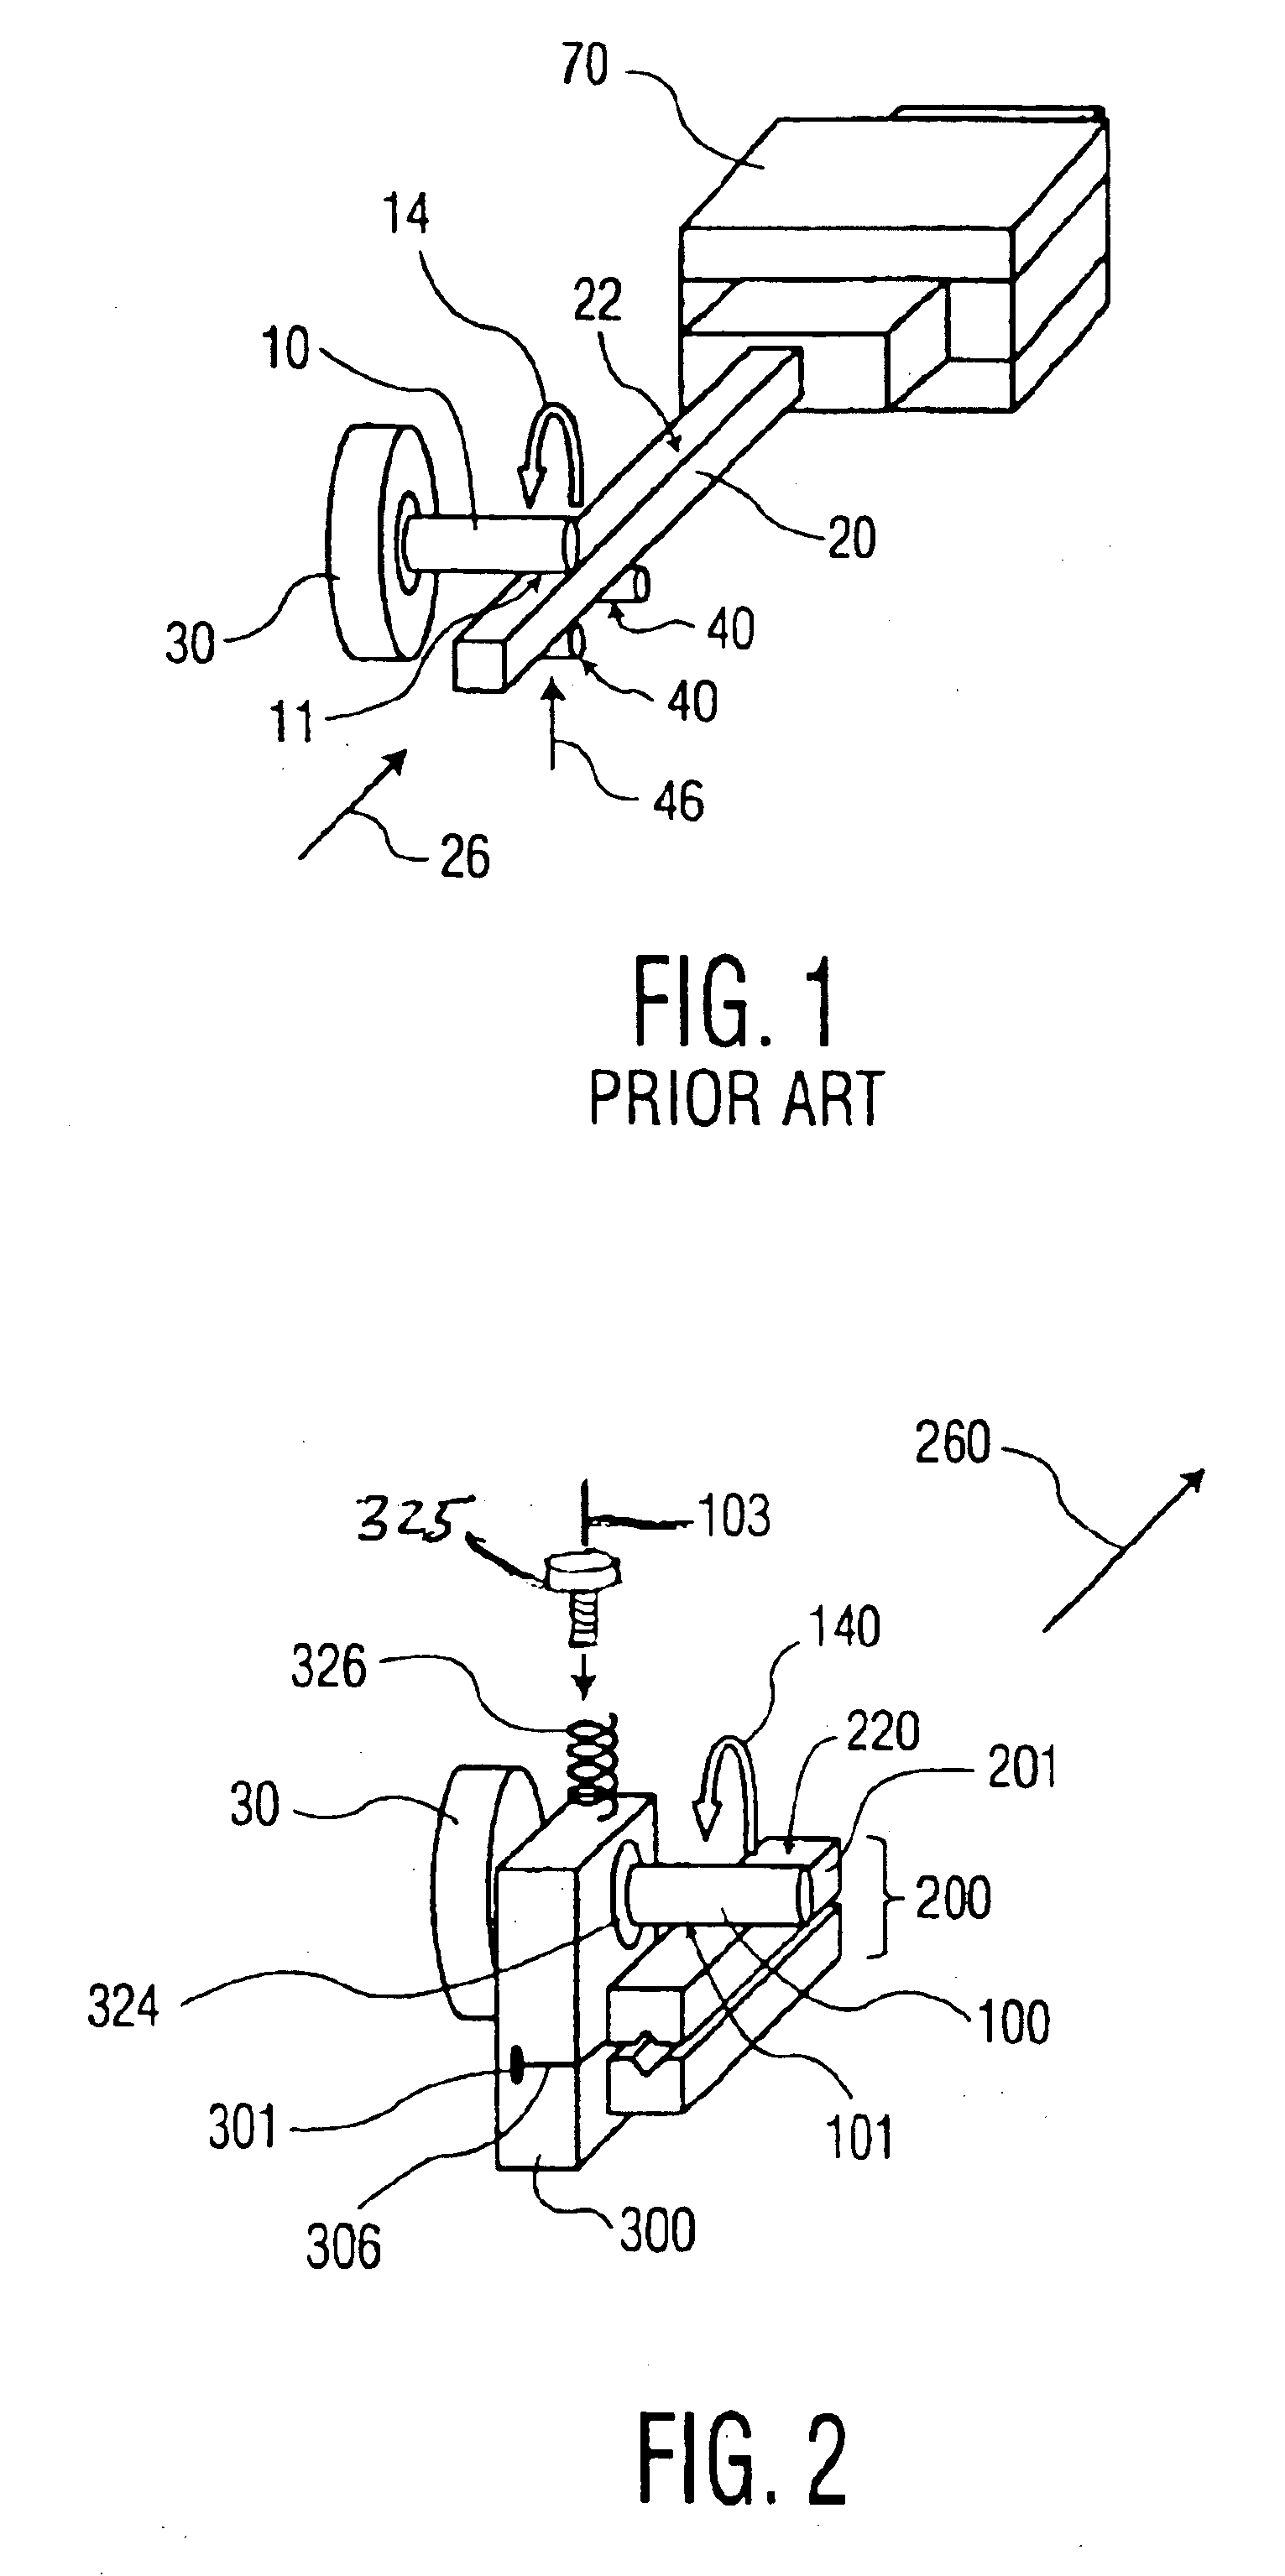 Method and apparatus for a low cost, high speed, and compact nanometer precision motion stage using friction drive and flexure hinge